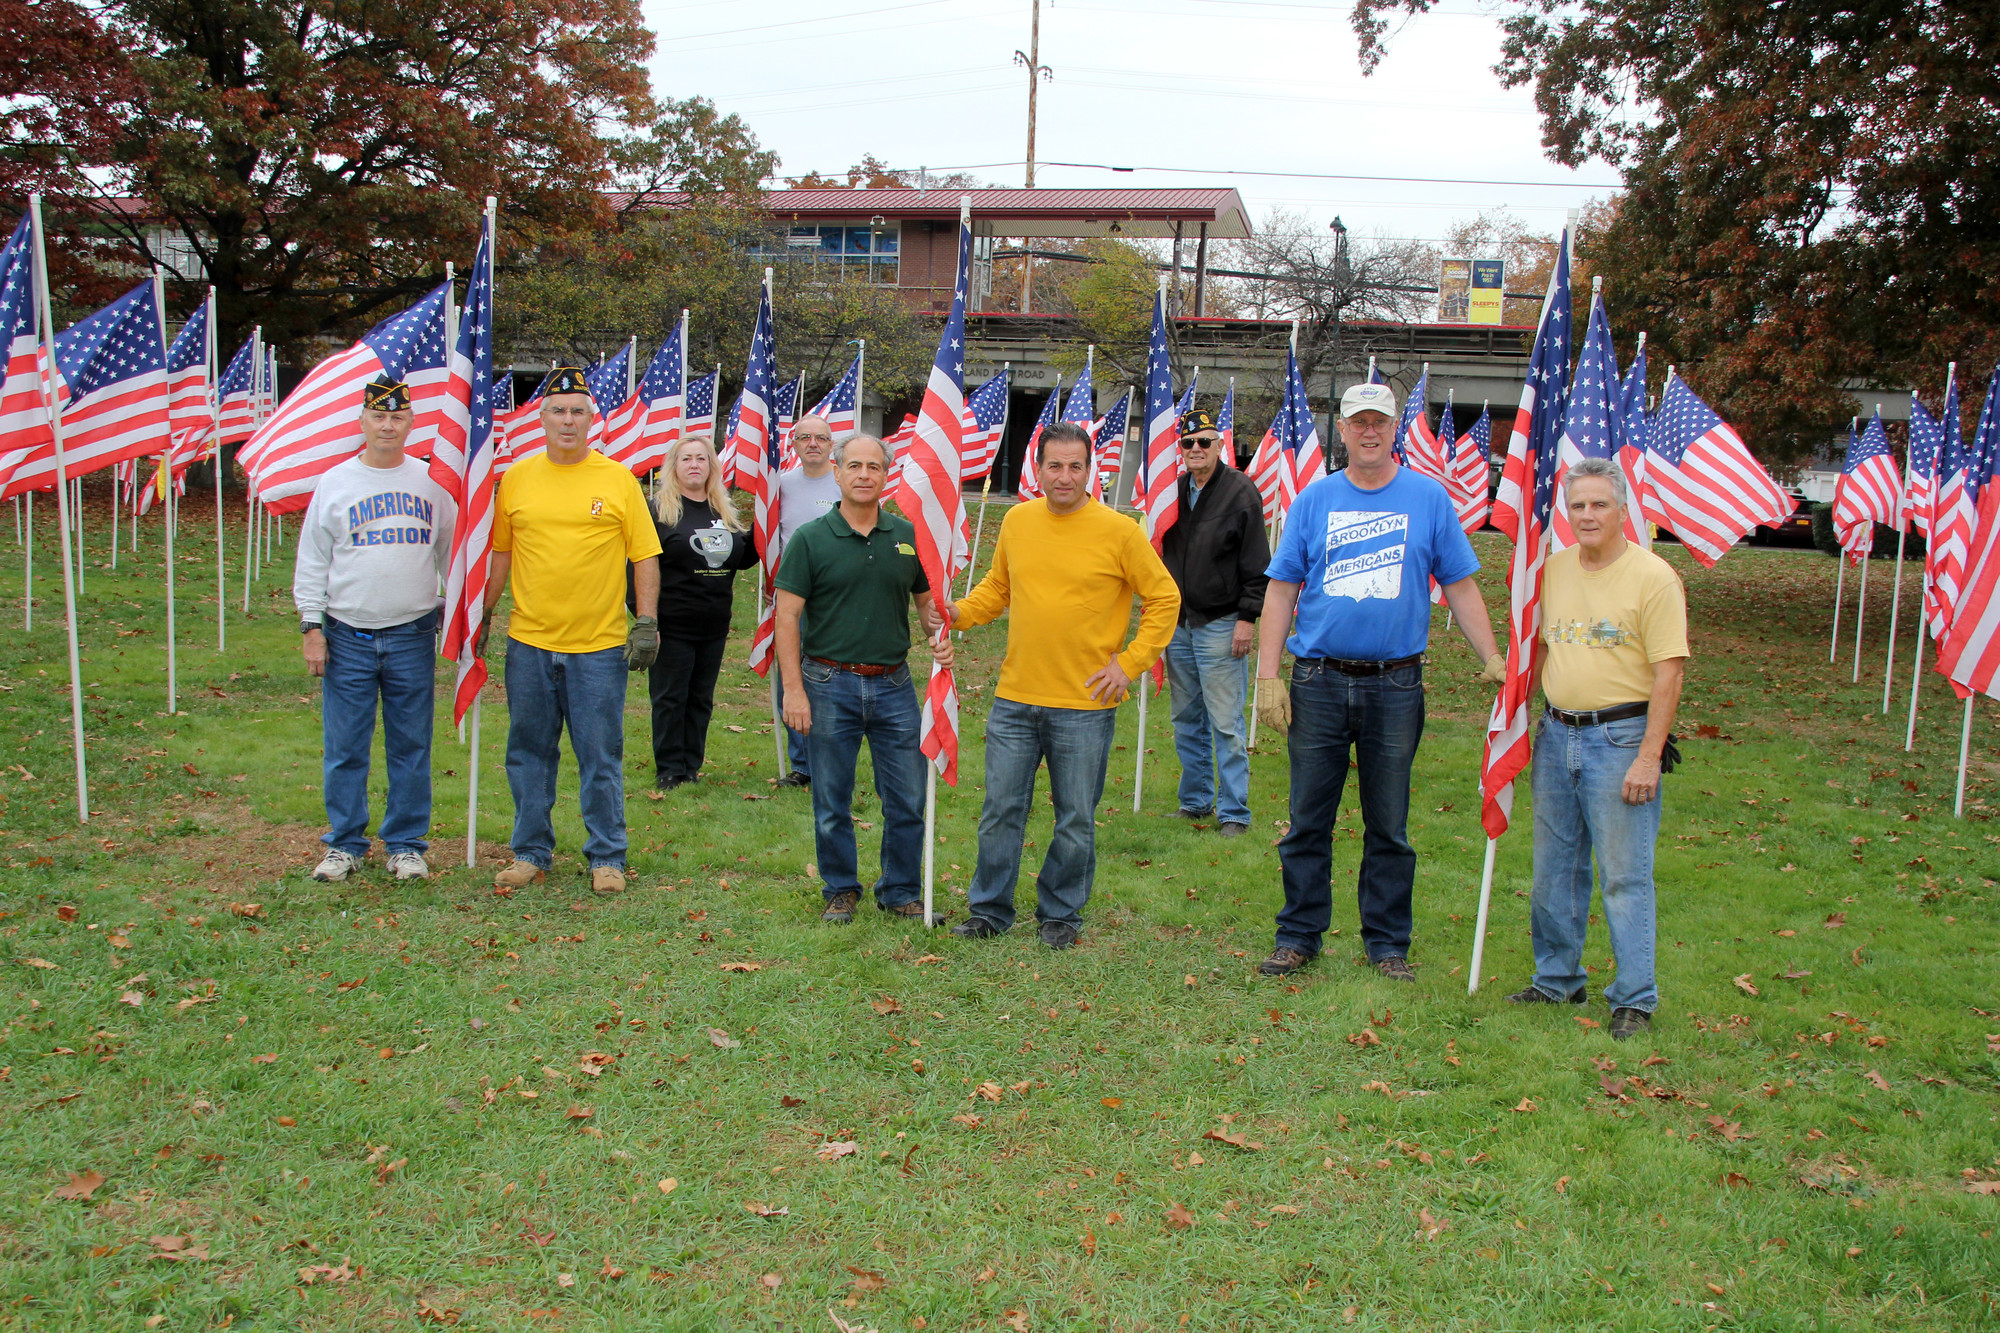 Members of the Seaford Wellness Council and Seaford American Legion Post 1132 set up dozens of American flags in front of the Seaford train station last Saturday morning to create the Field of Honor, an annual tradition in the community in commemoration with Veterans Day.